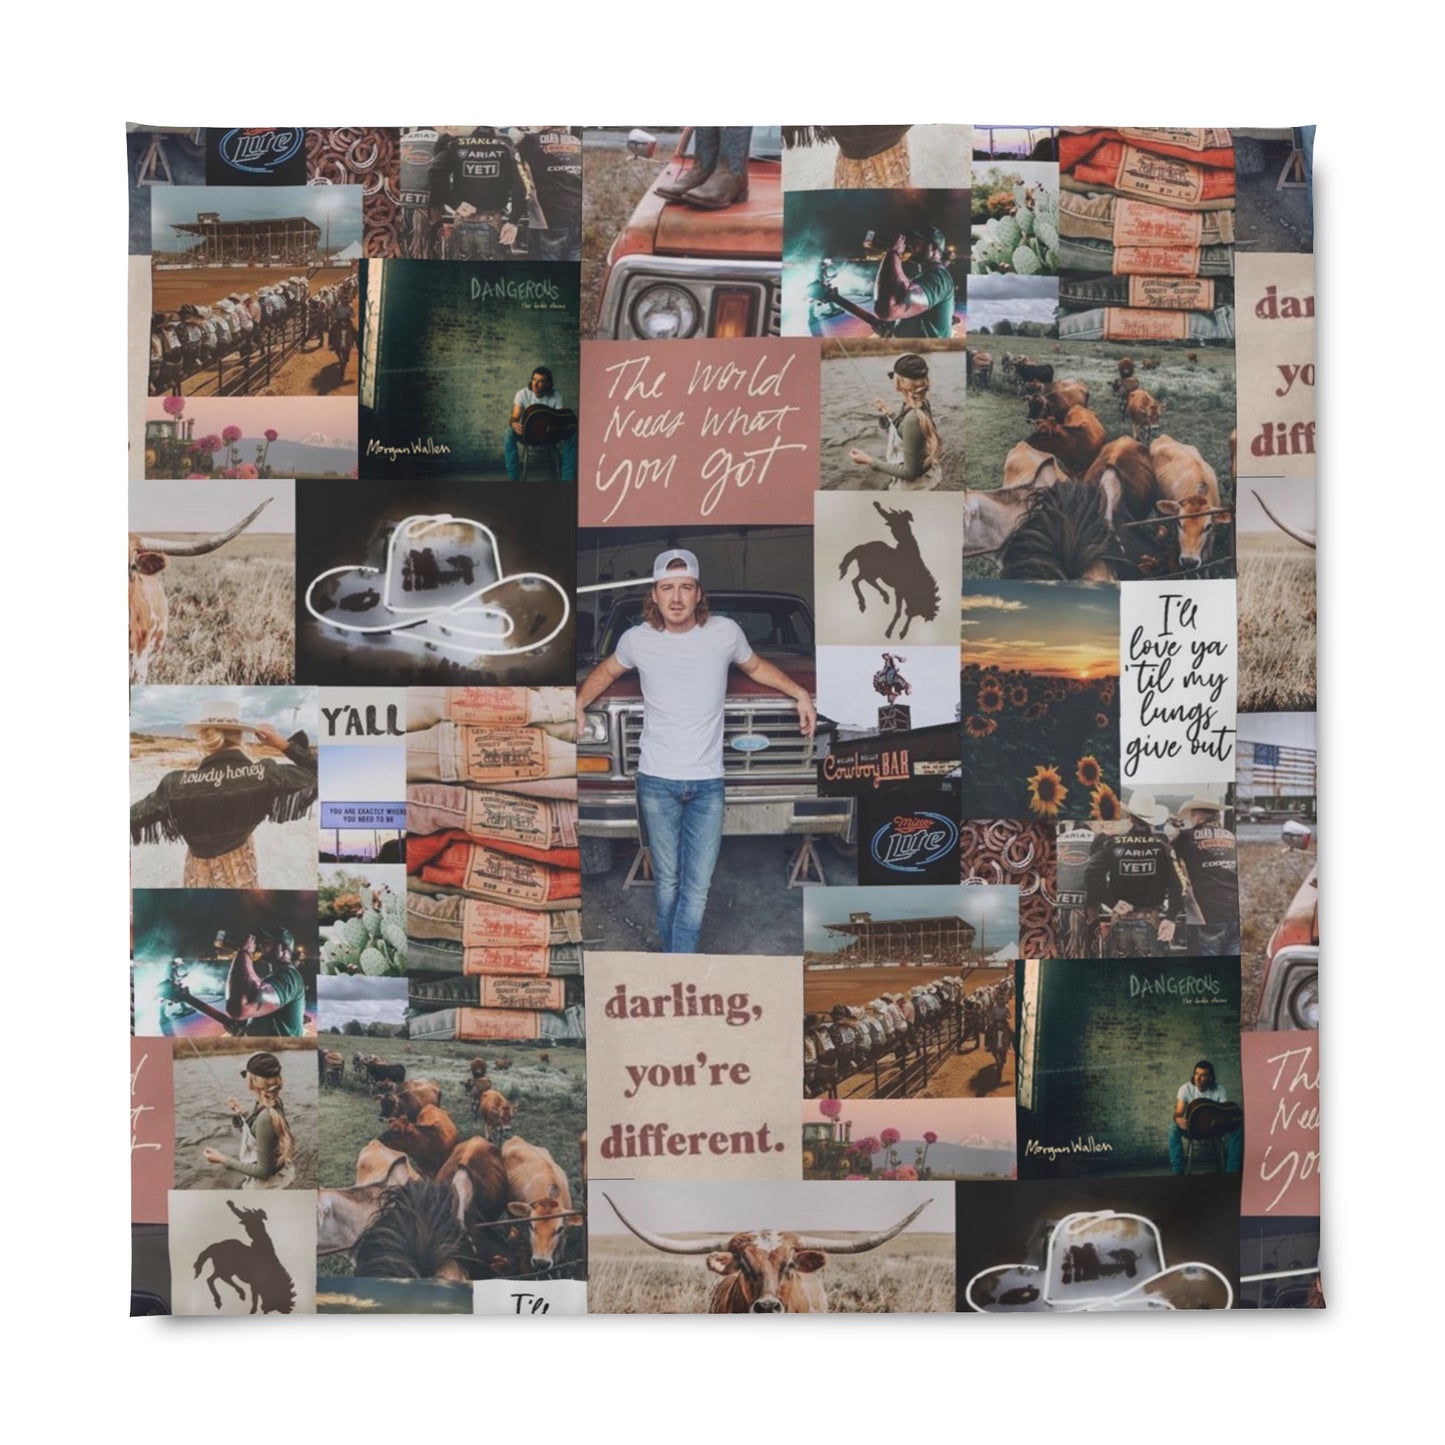 Morgan Wallen Darling You're Different Collage Duvet Cover